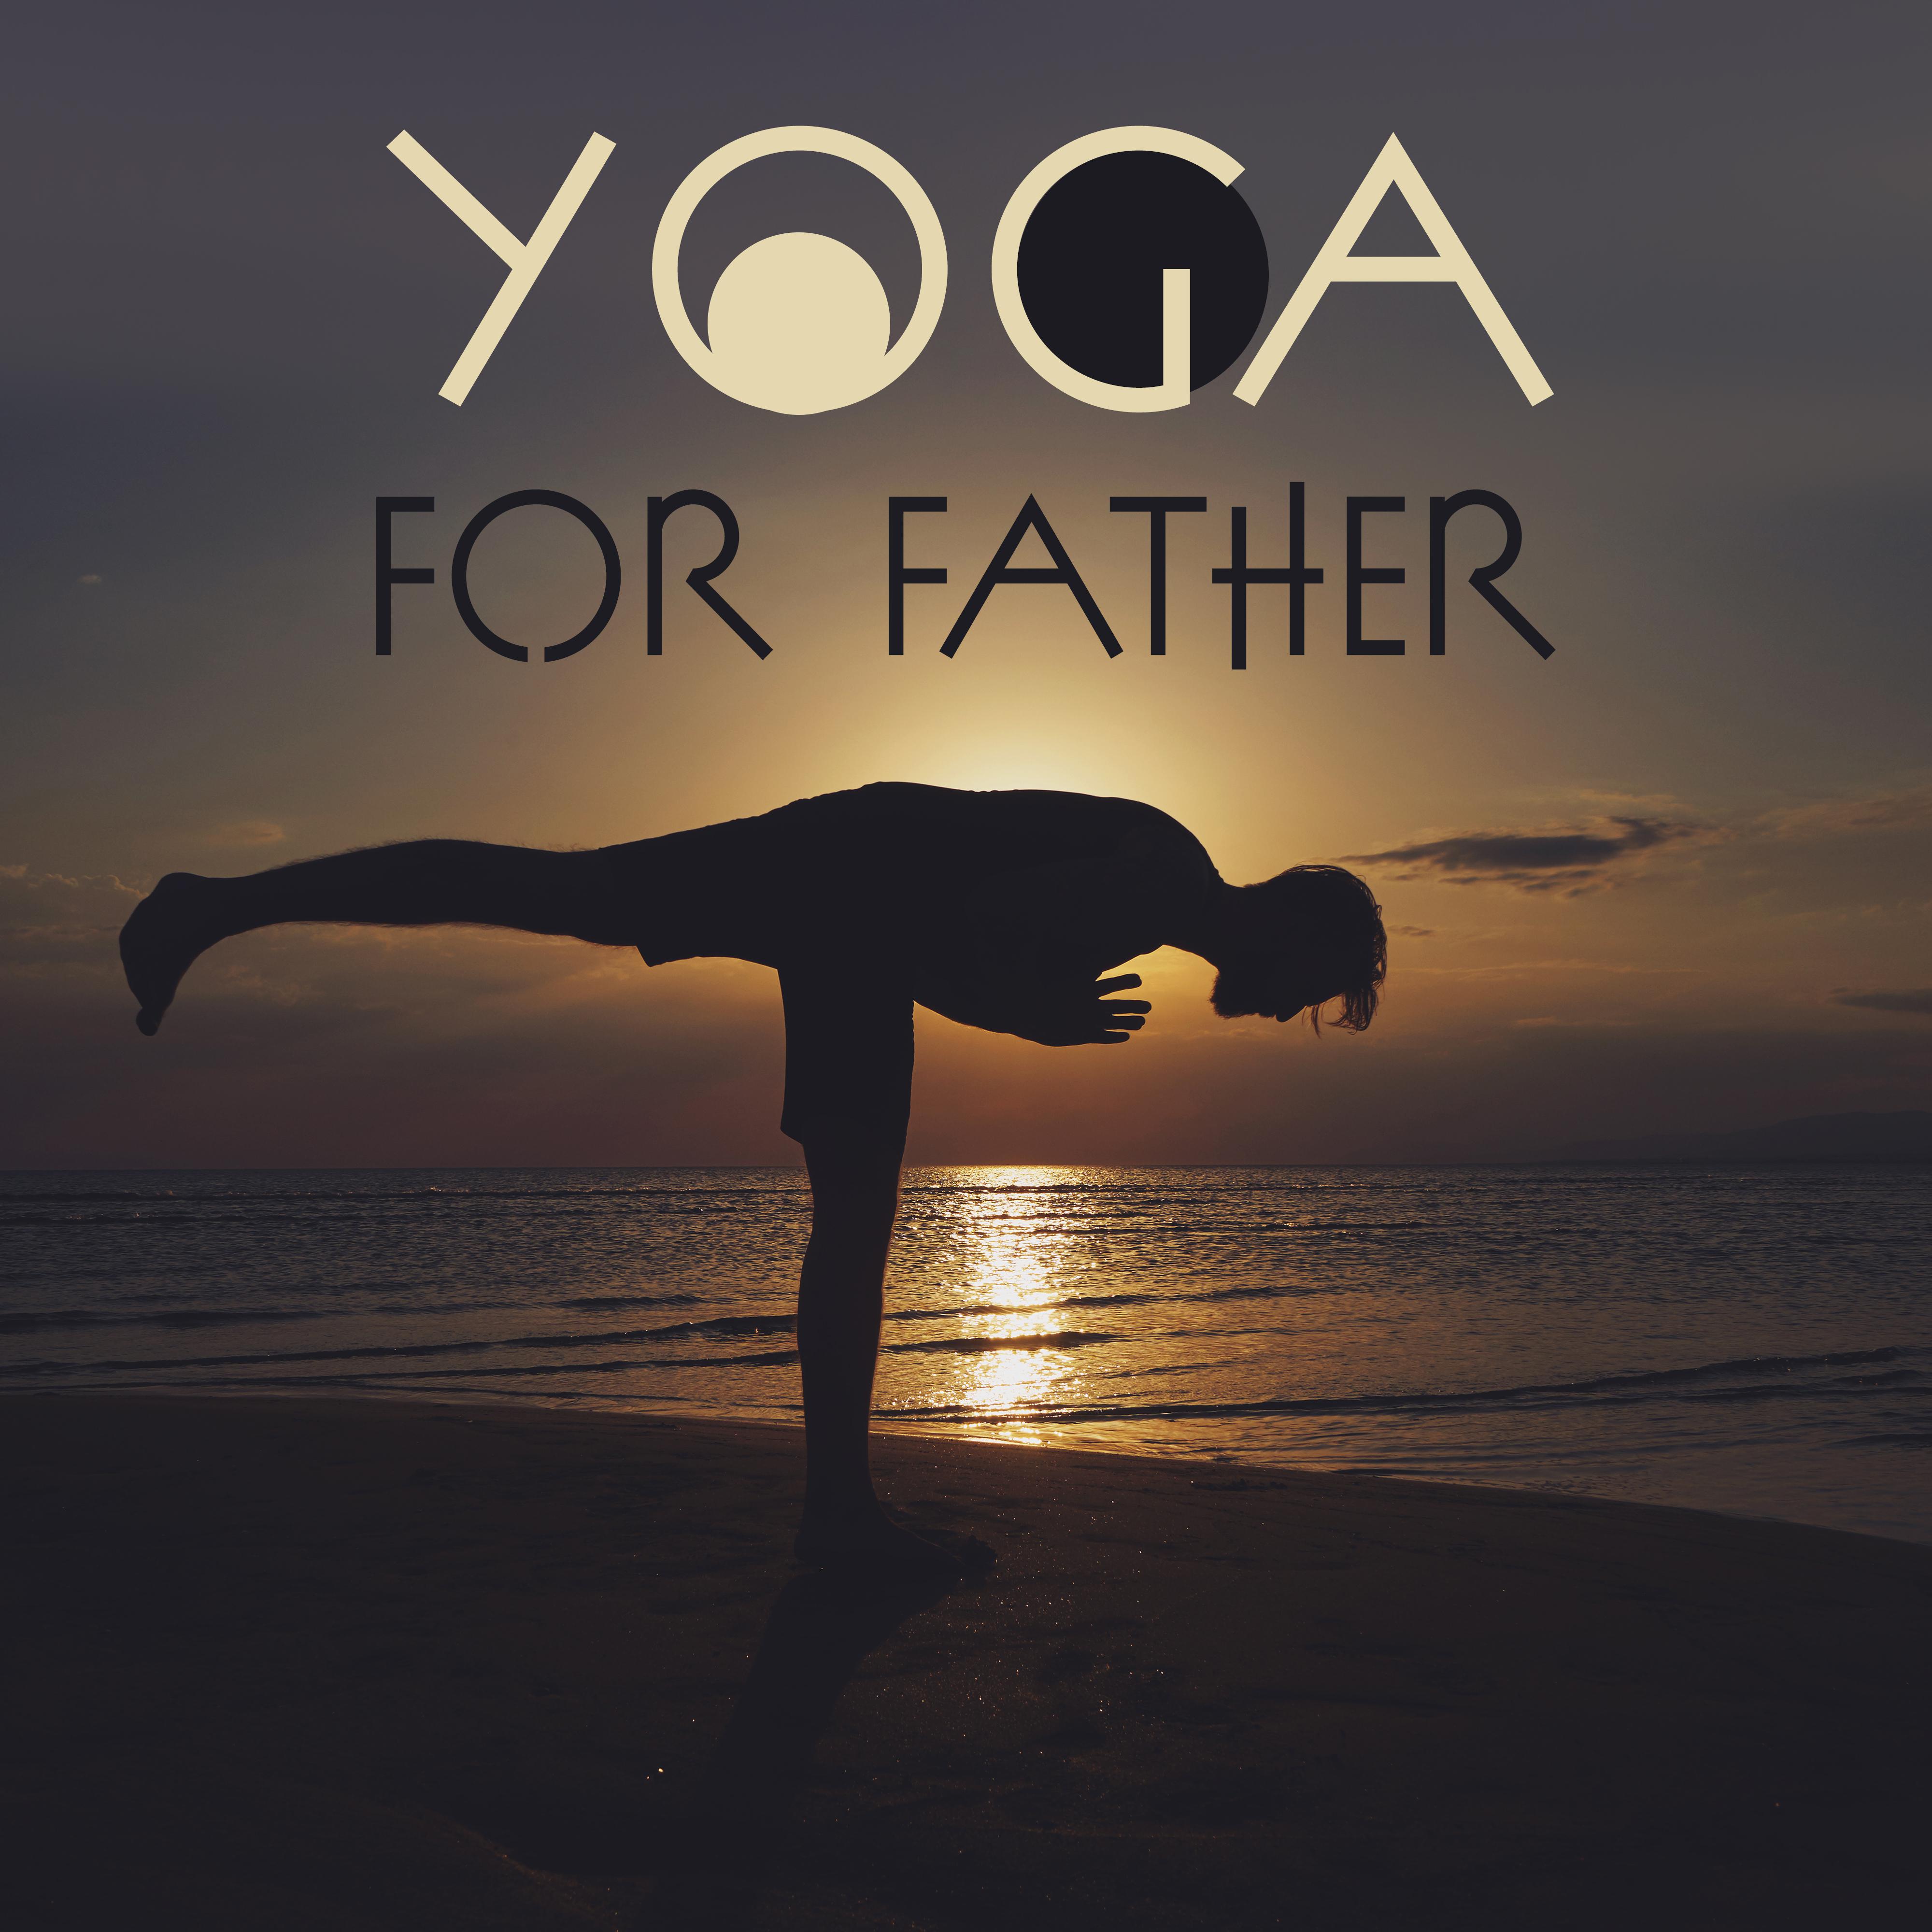 Yoga for Father: Meditation Therapy for Father' s Day, Yoga Training, Pure Mind, Meditation Music Zone, Zen Lounge, Calming Sounds Reduce Stress, Deep Harmony